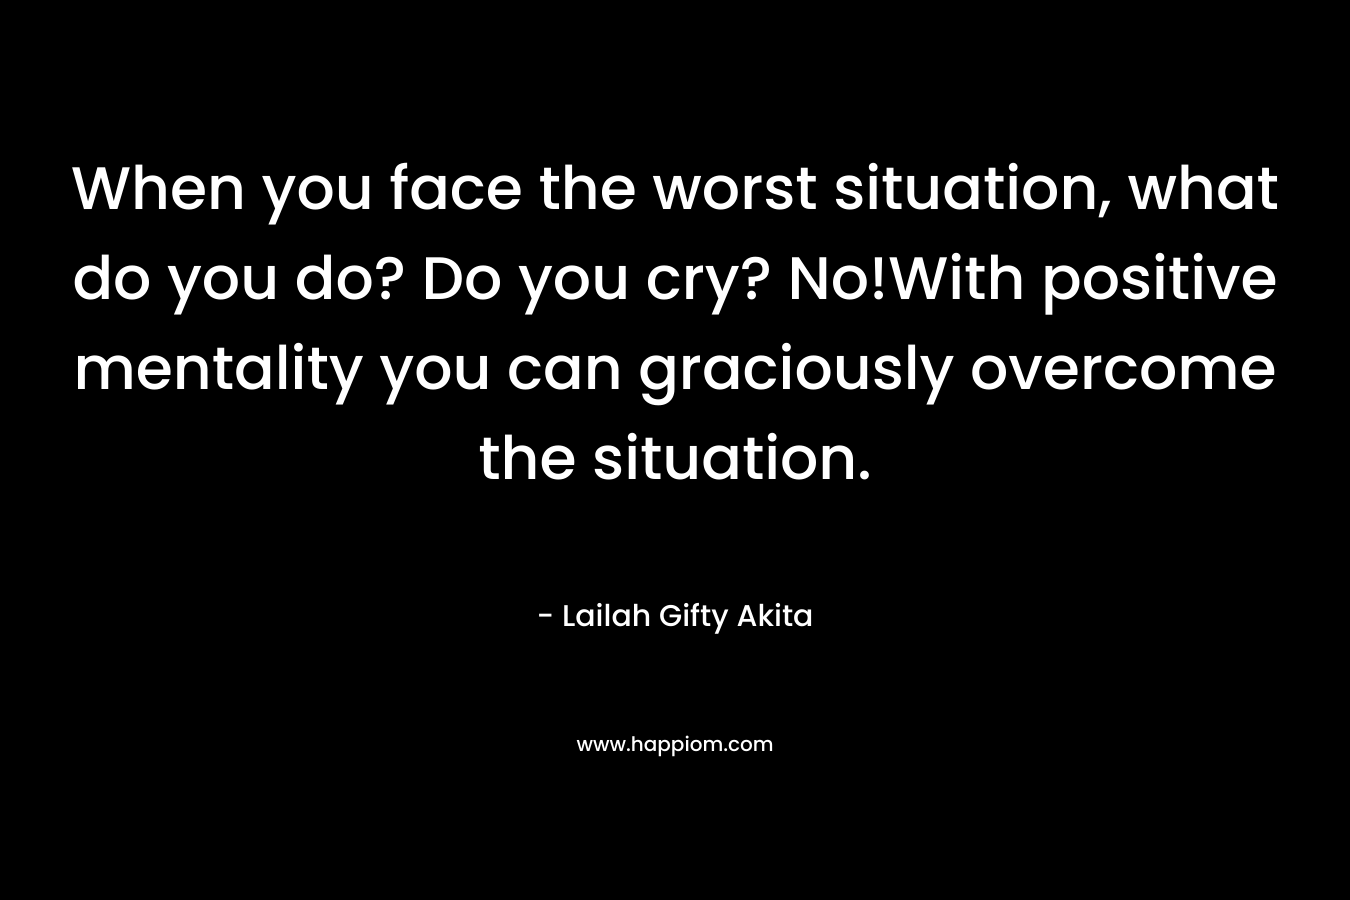 When you face the worst situation, what do you do? Do you cry? No!With positive mentality you can graciously overcome the situation.